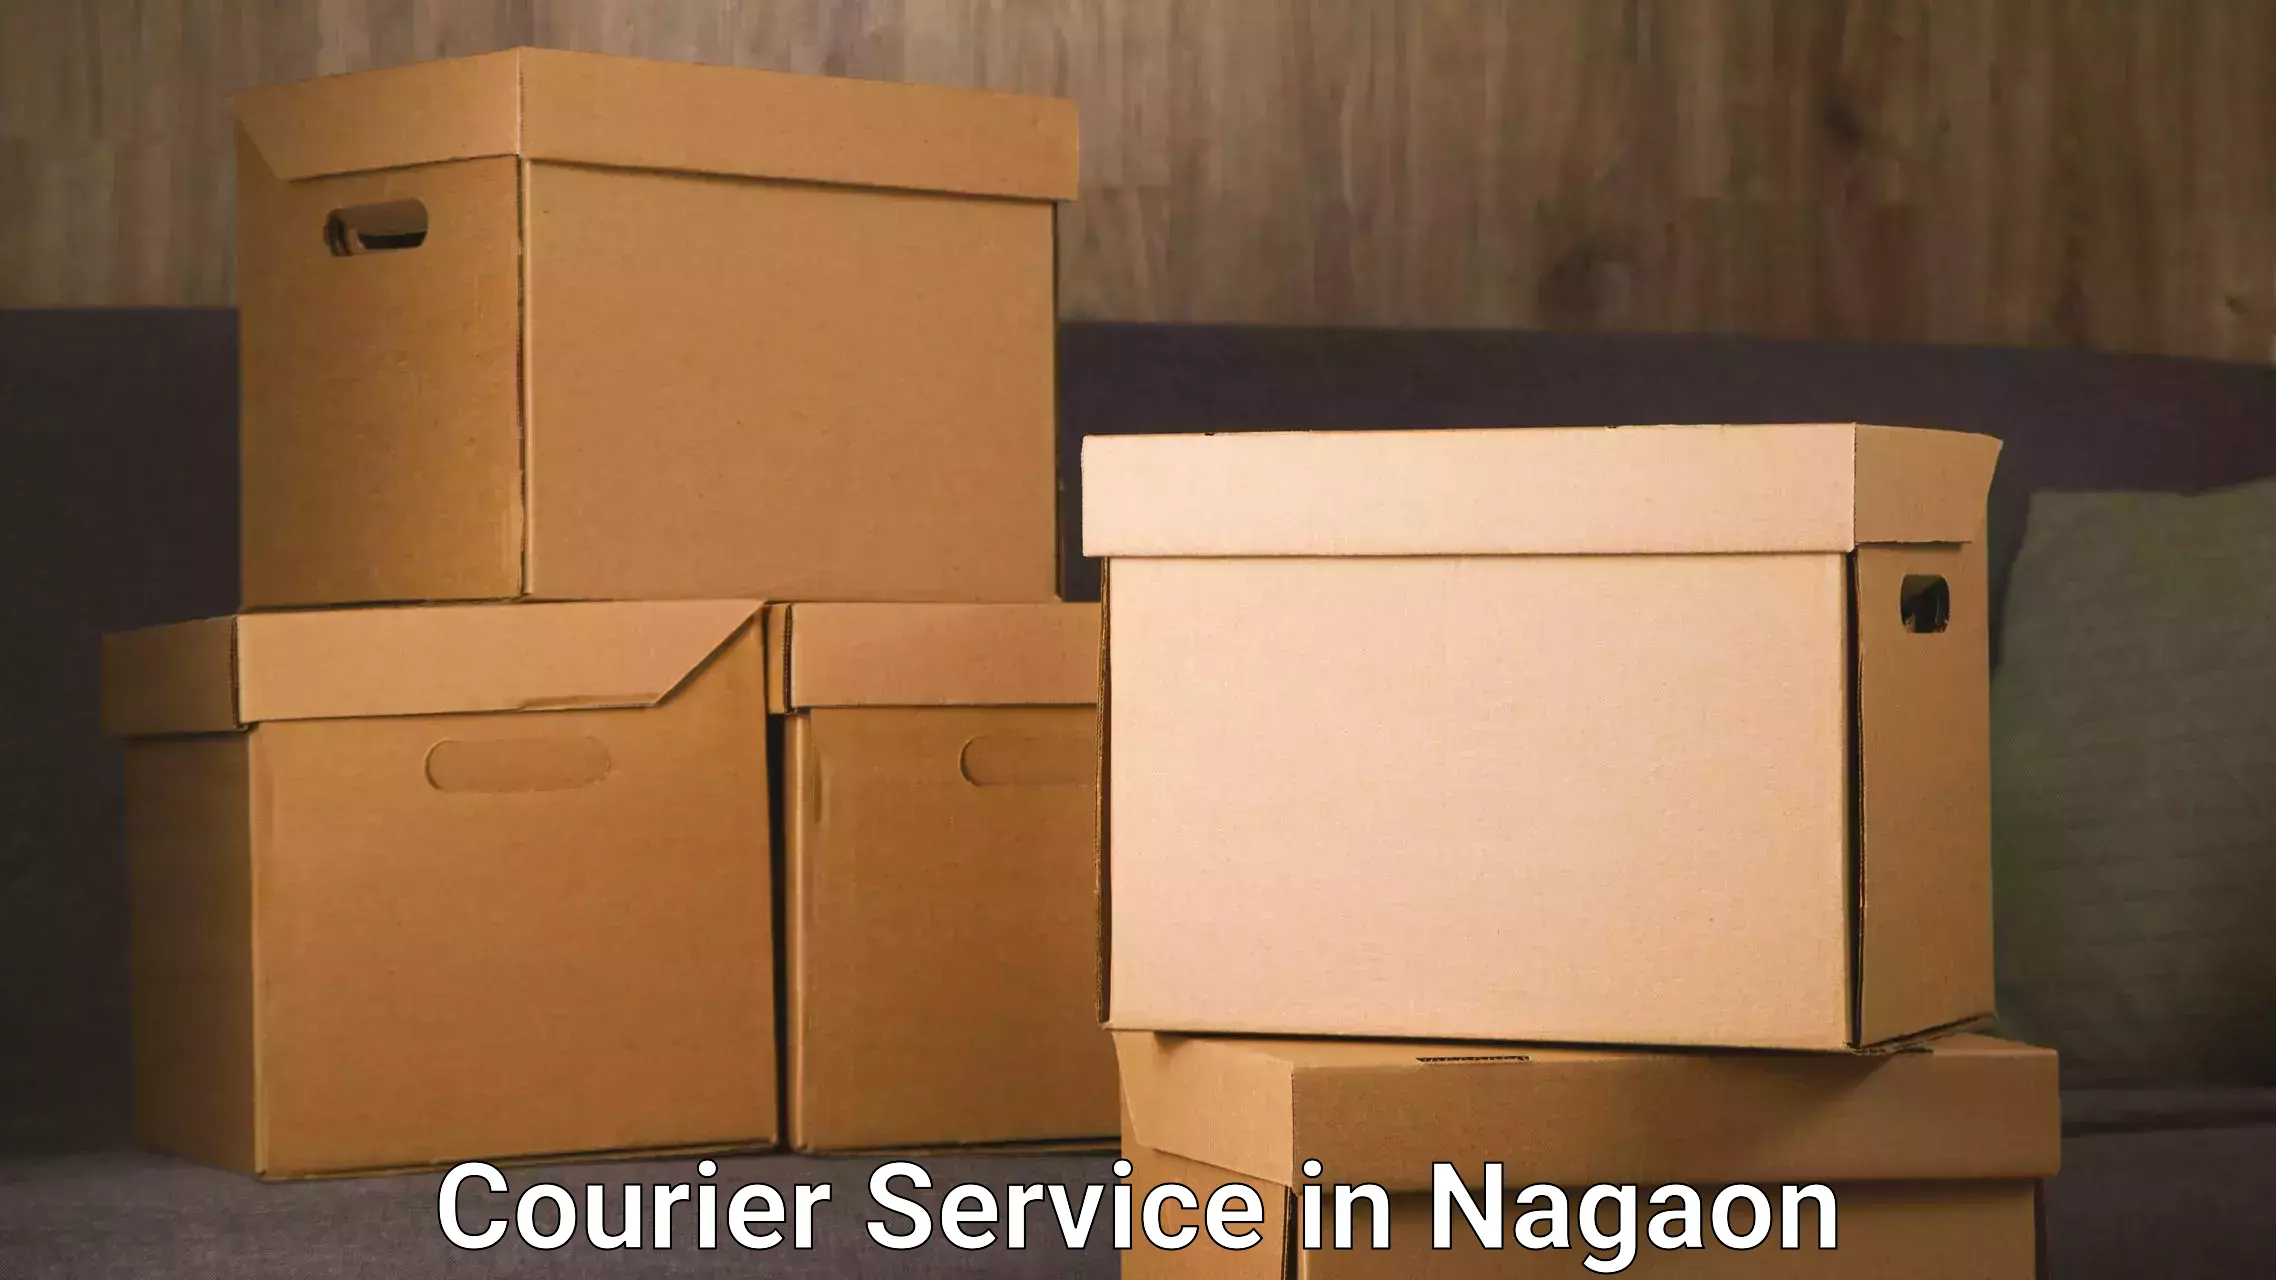 24-hour courier service in Nagaon